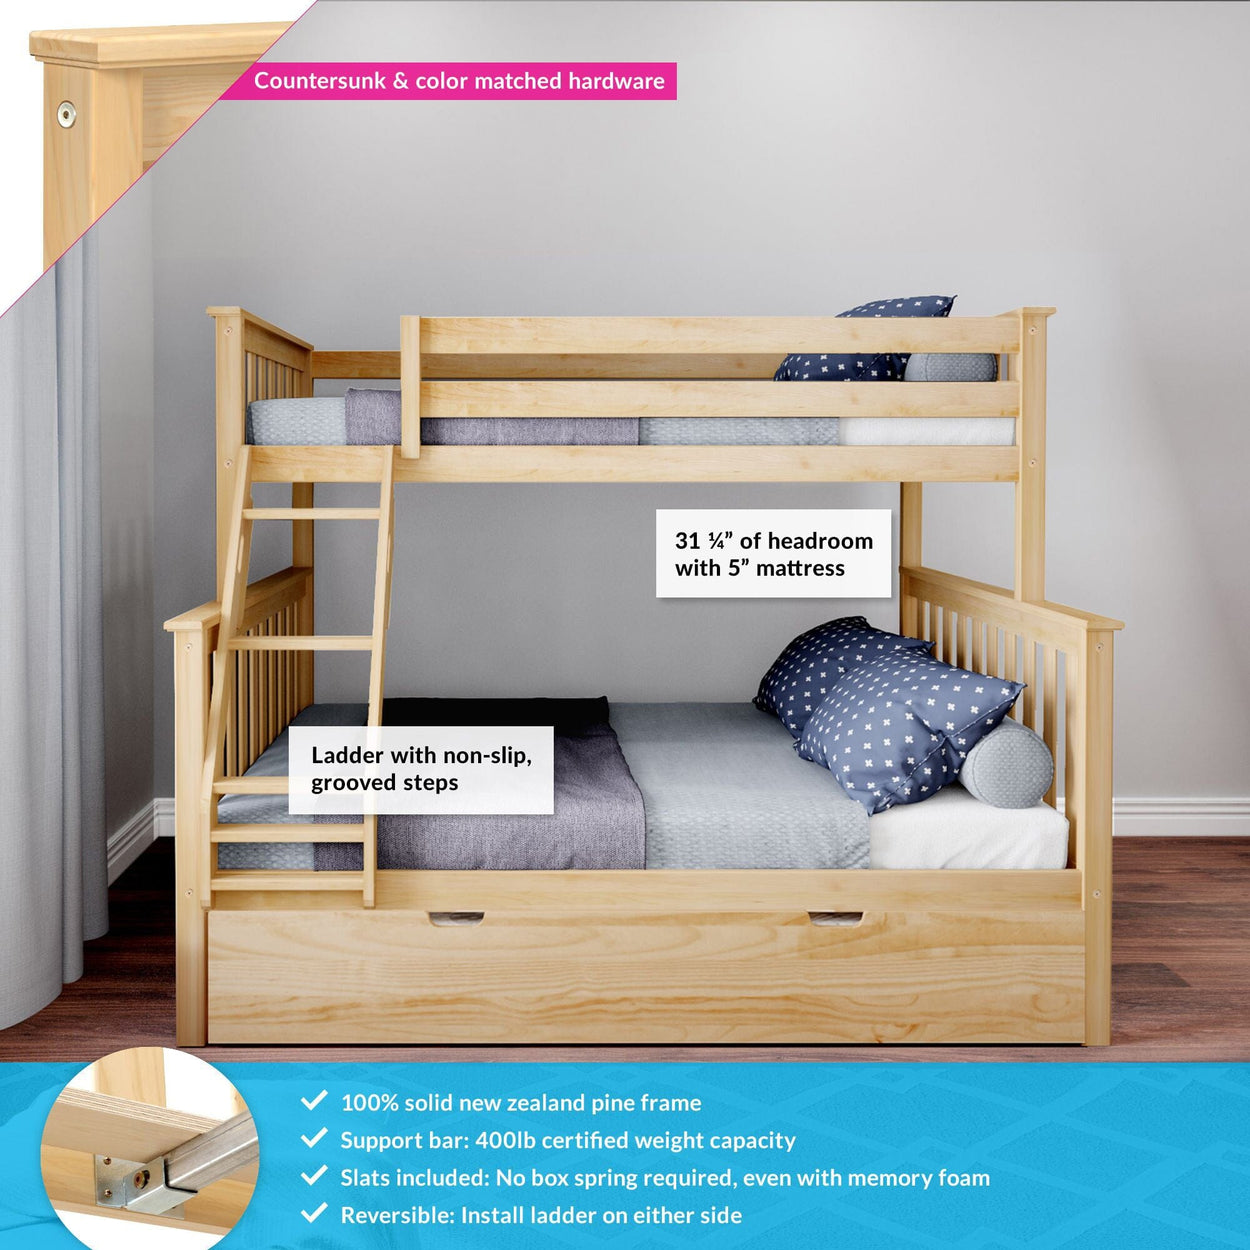 186231-001 : Bunk Beds Classic Twin over Full Bunk Bed with Trundle, Natural